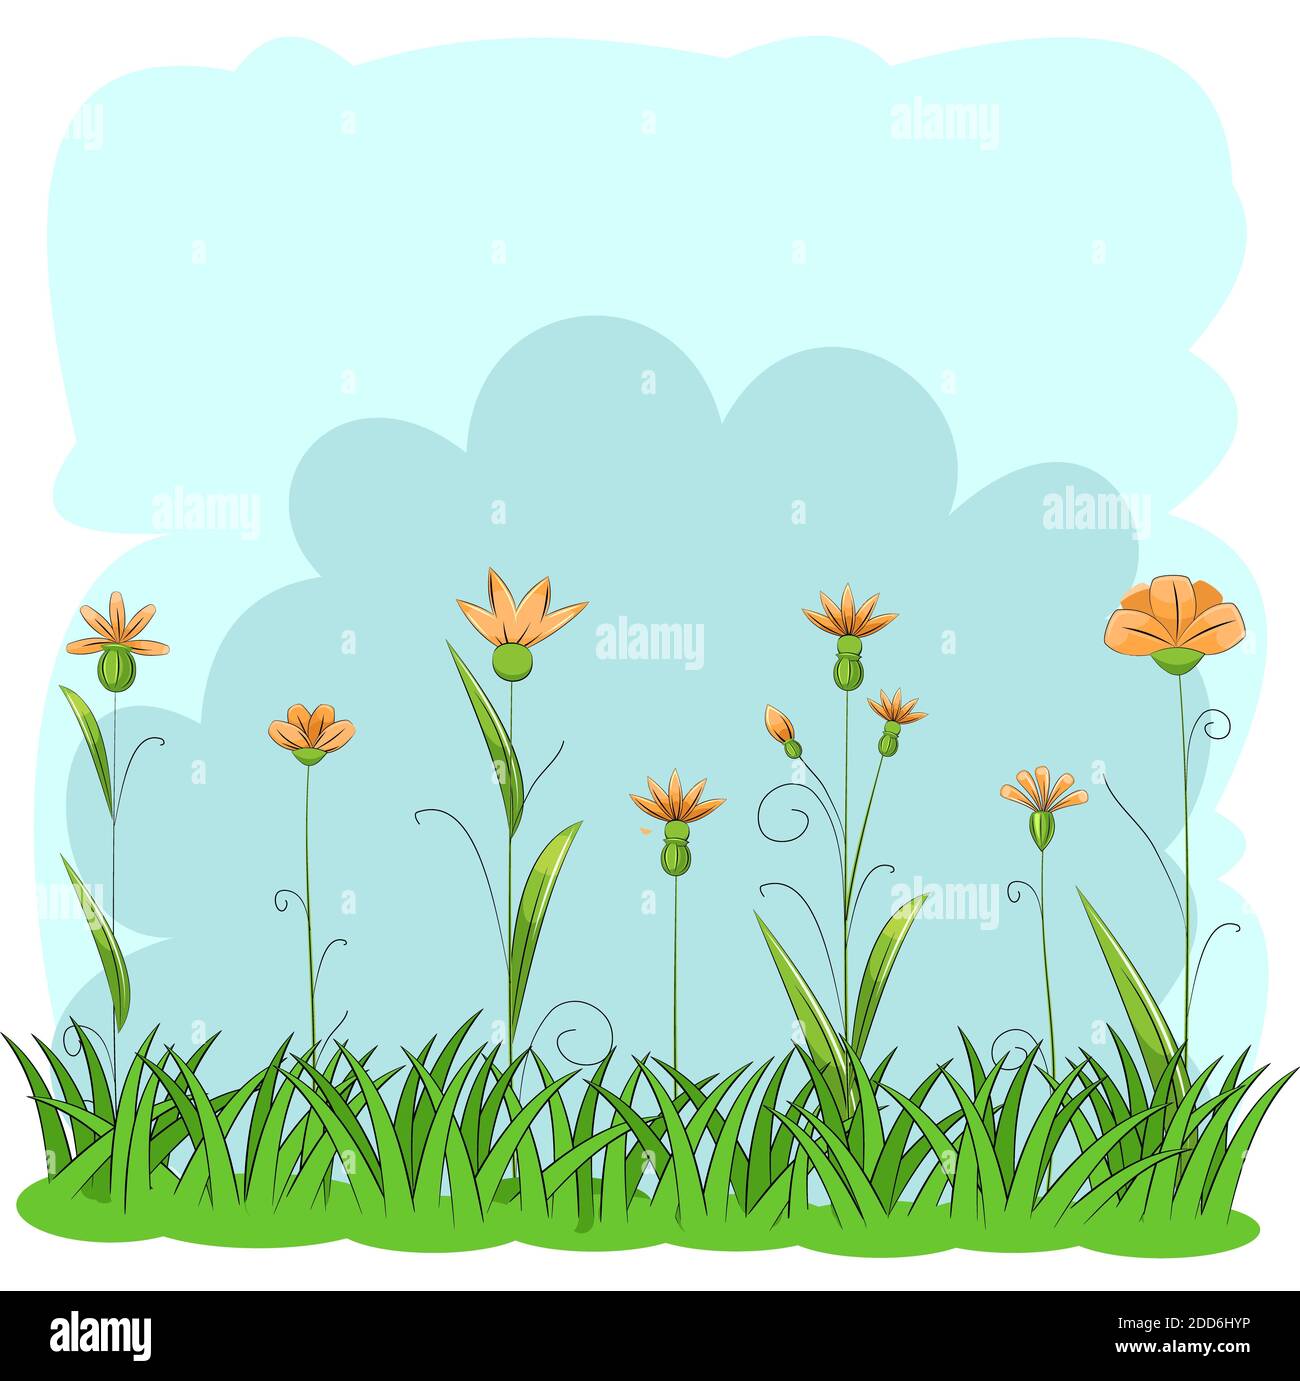 Blooming meadow with grass and flowers. Sky. Cartoon just style. Isolated on white background. Romantic fabulous illustration. Stock Photo